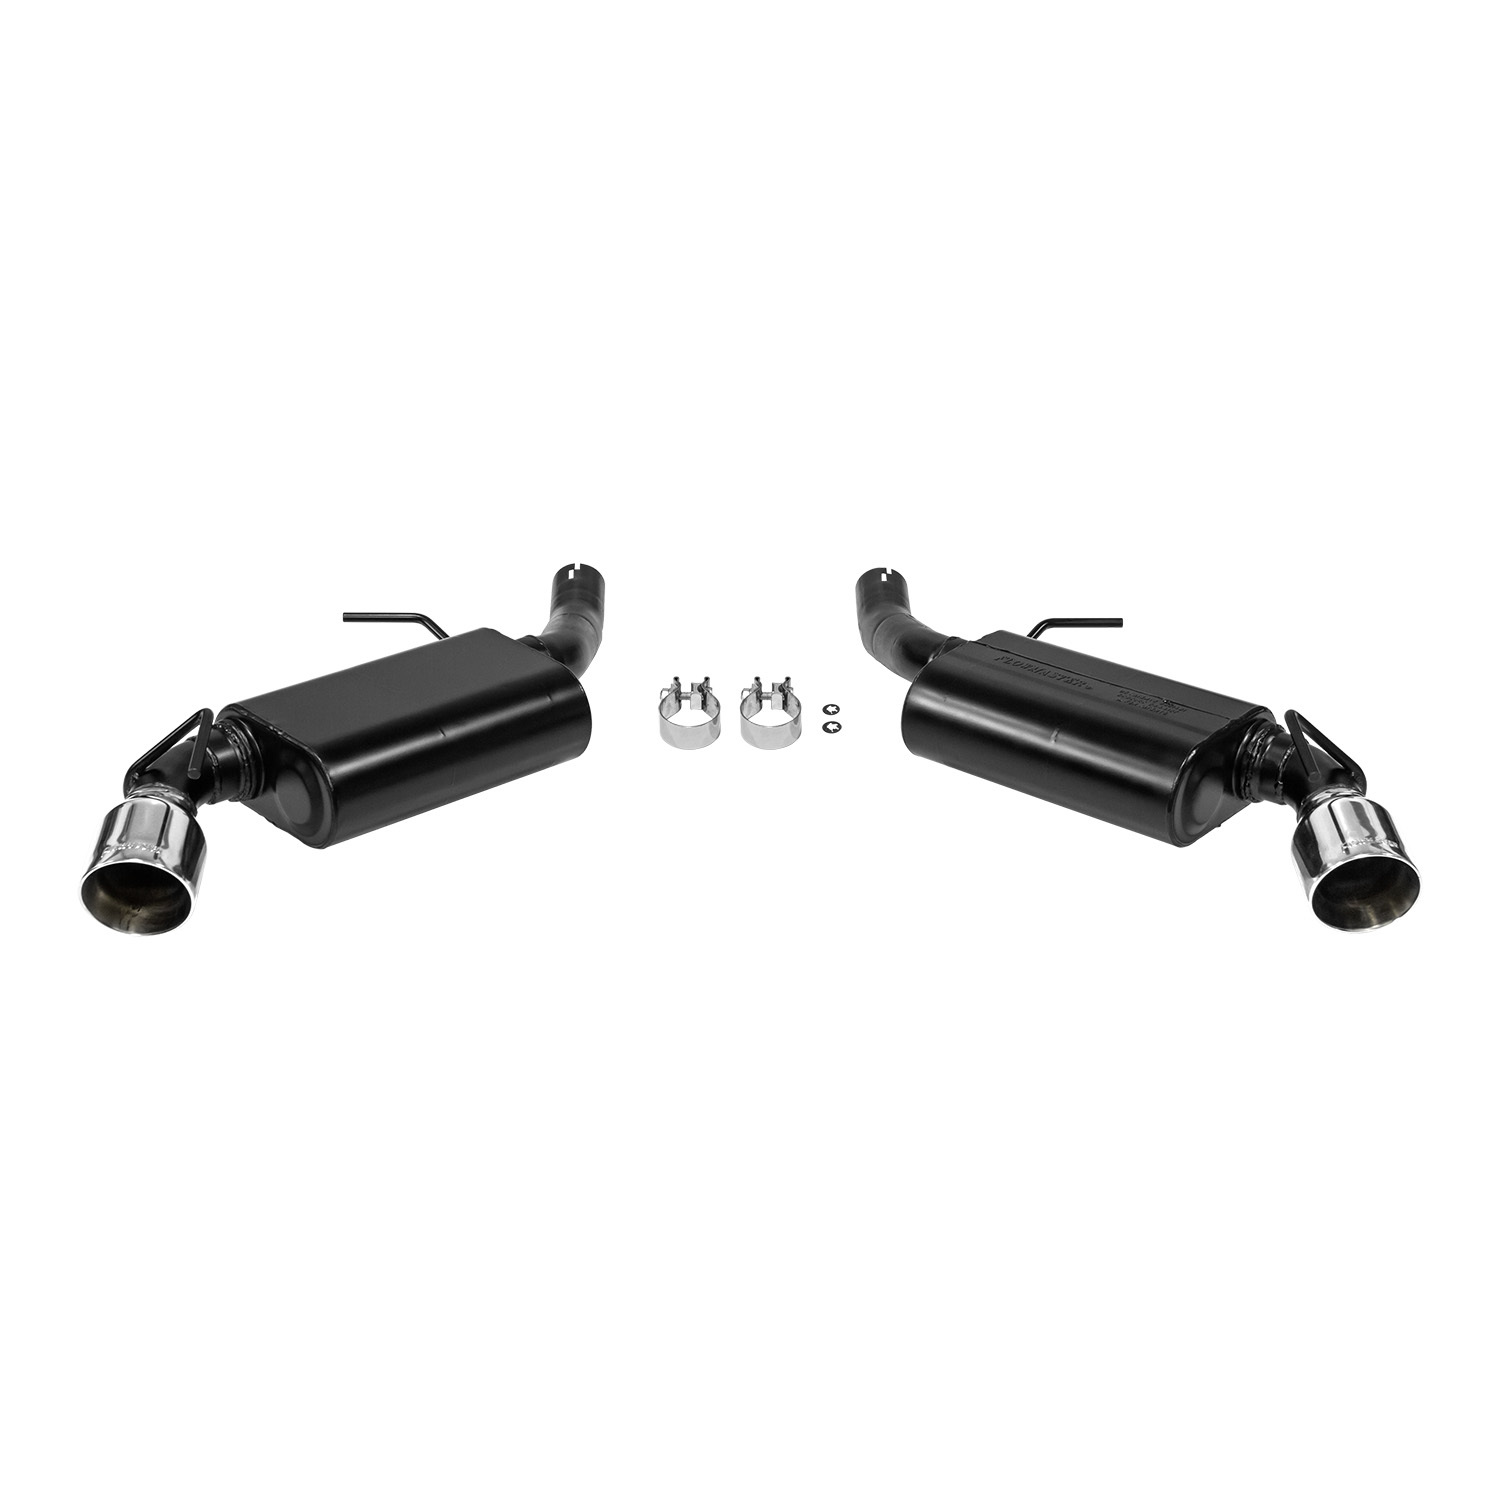 Flowmaster Exhaust System, American Thunder, Axle-Back, 2 1/2" Tailpipe, 4" Tips, Stainless, Natural, Chevy Camaro 2016-1